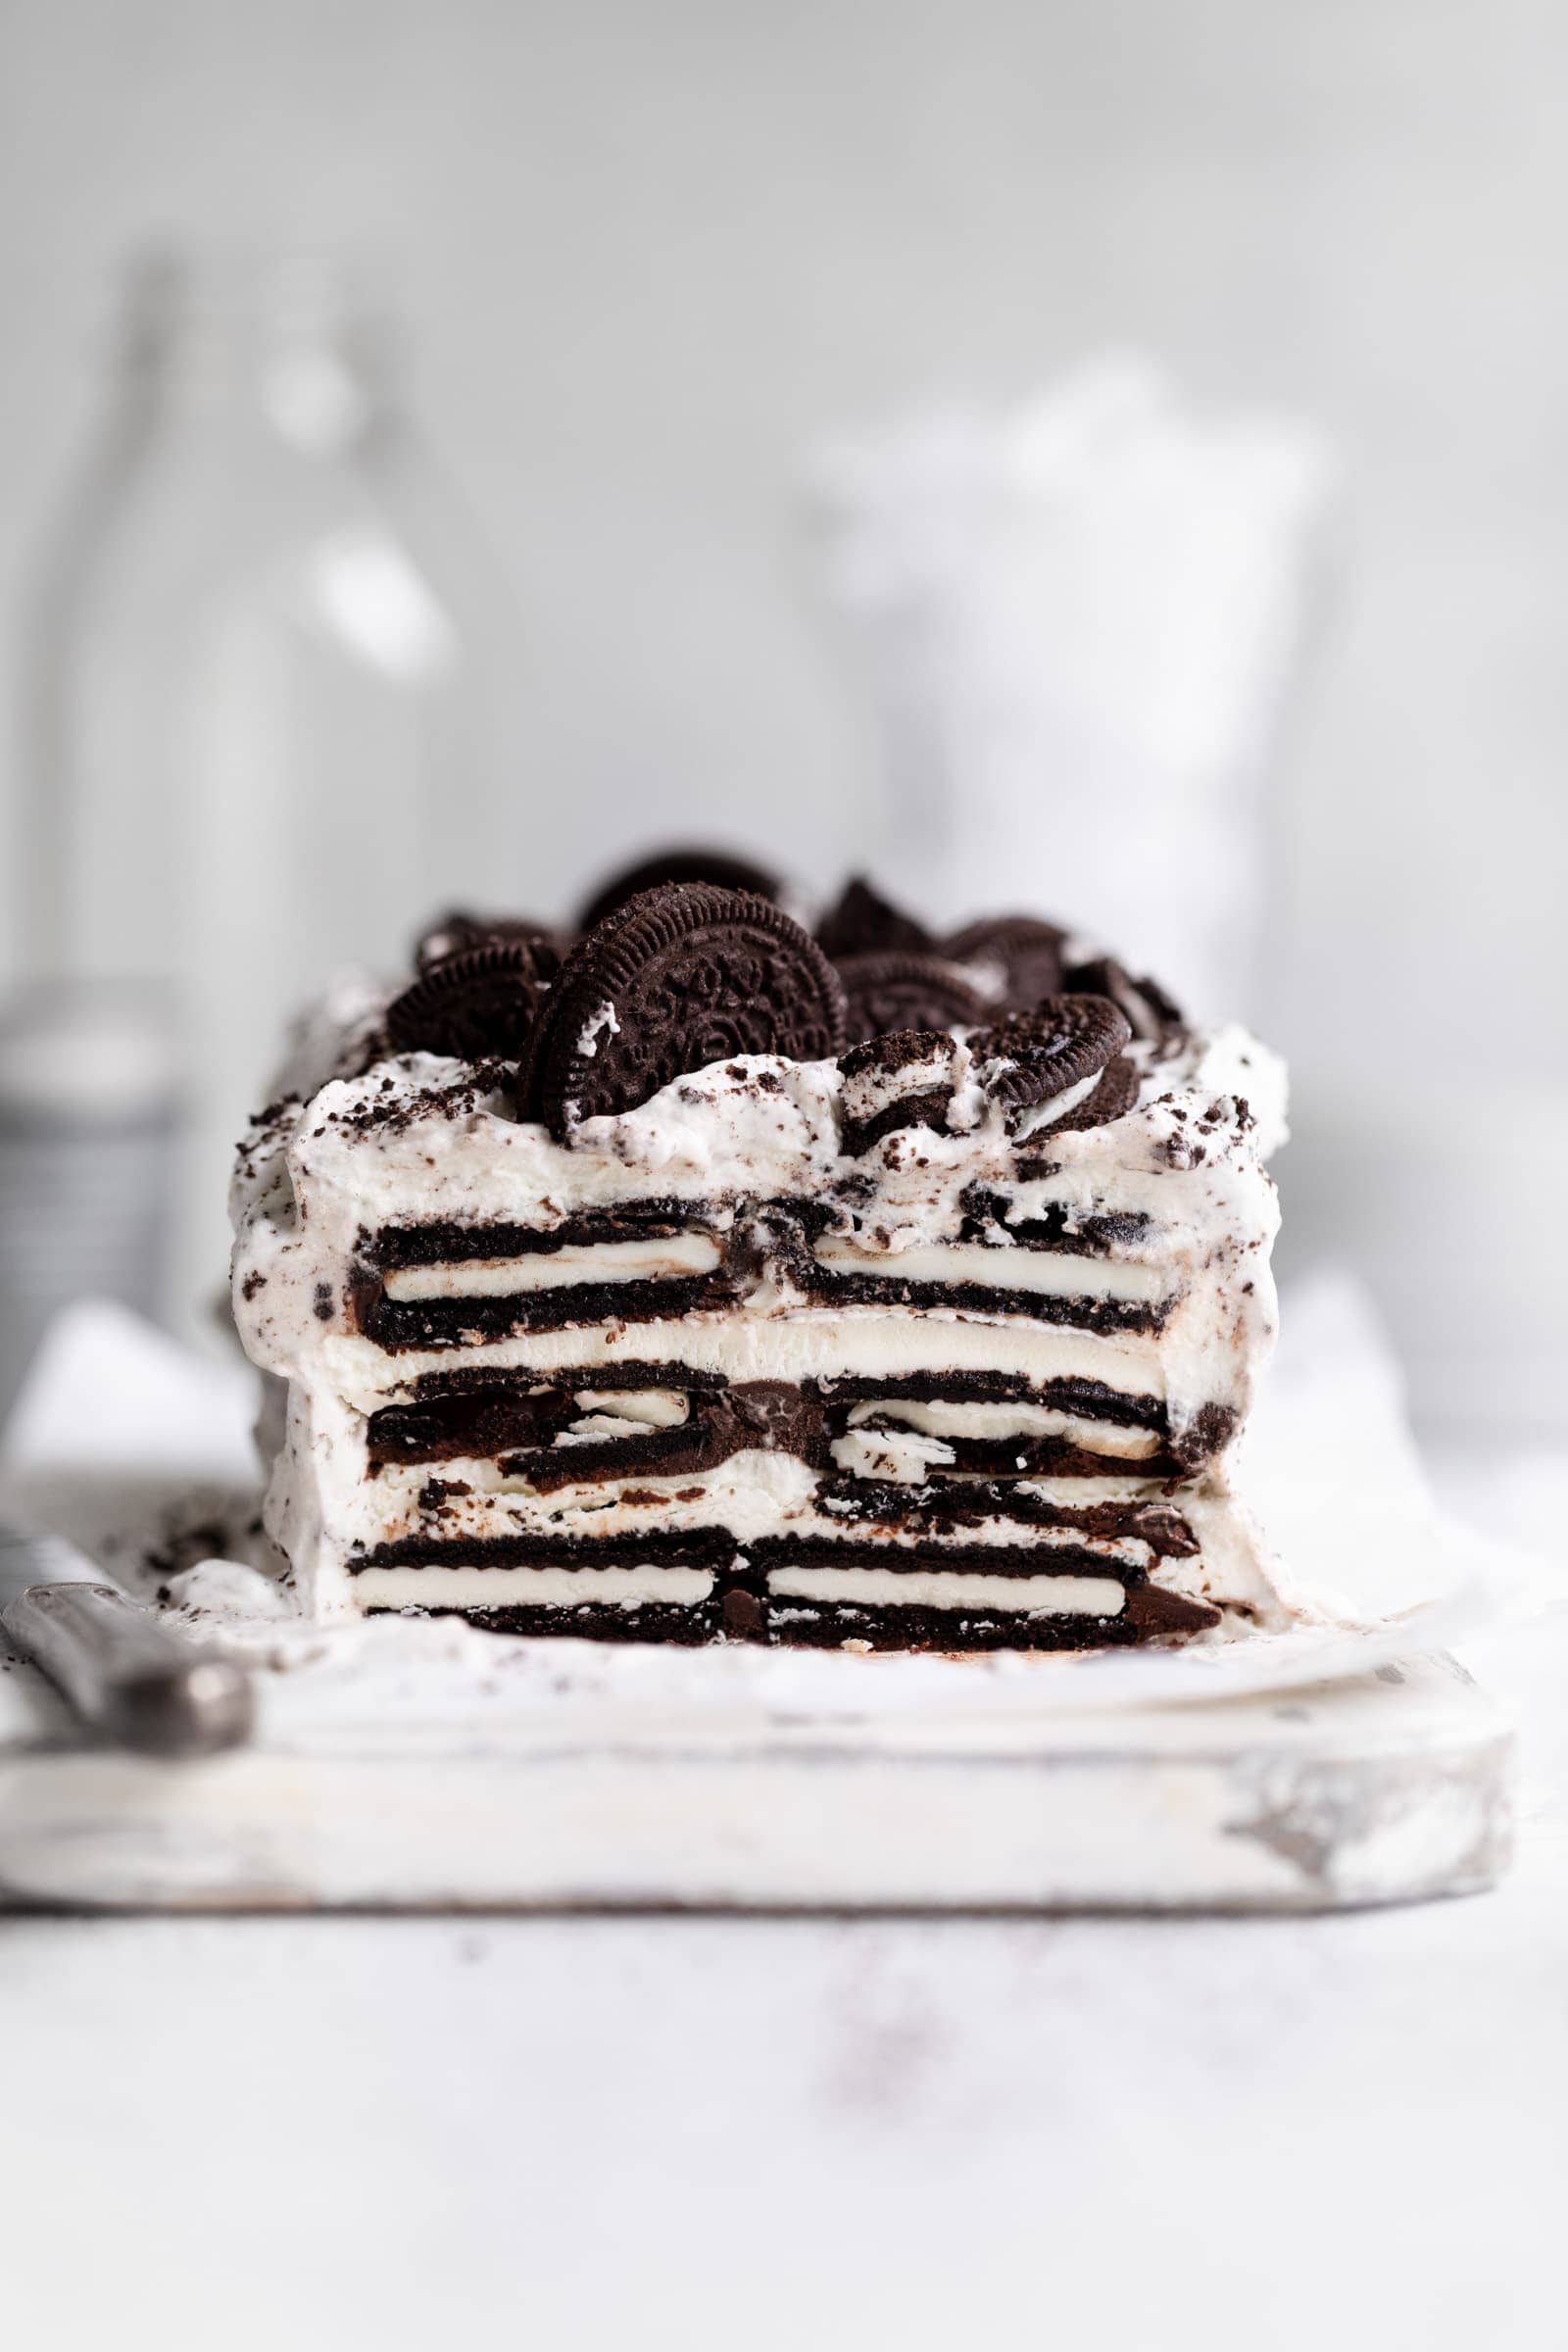 Icebox Cake - only 4 ingredients! – If You Give a Blonde a Kitchen